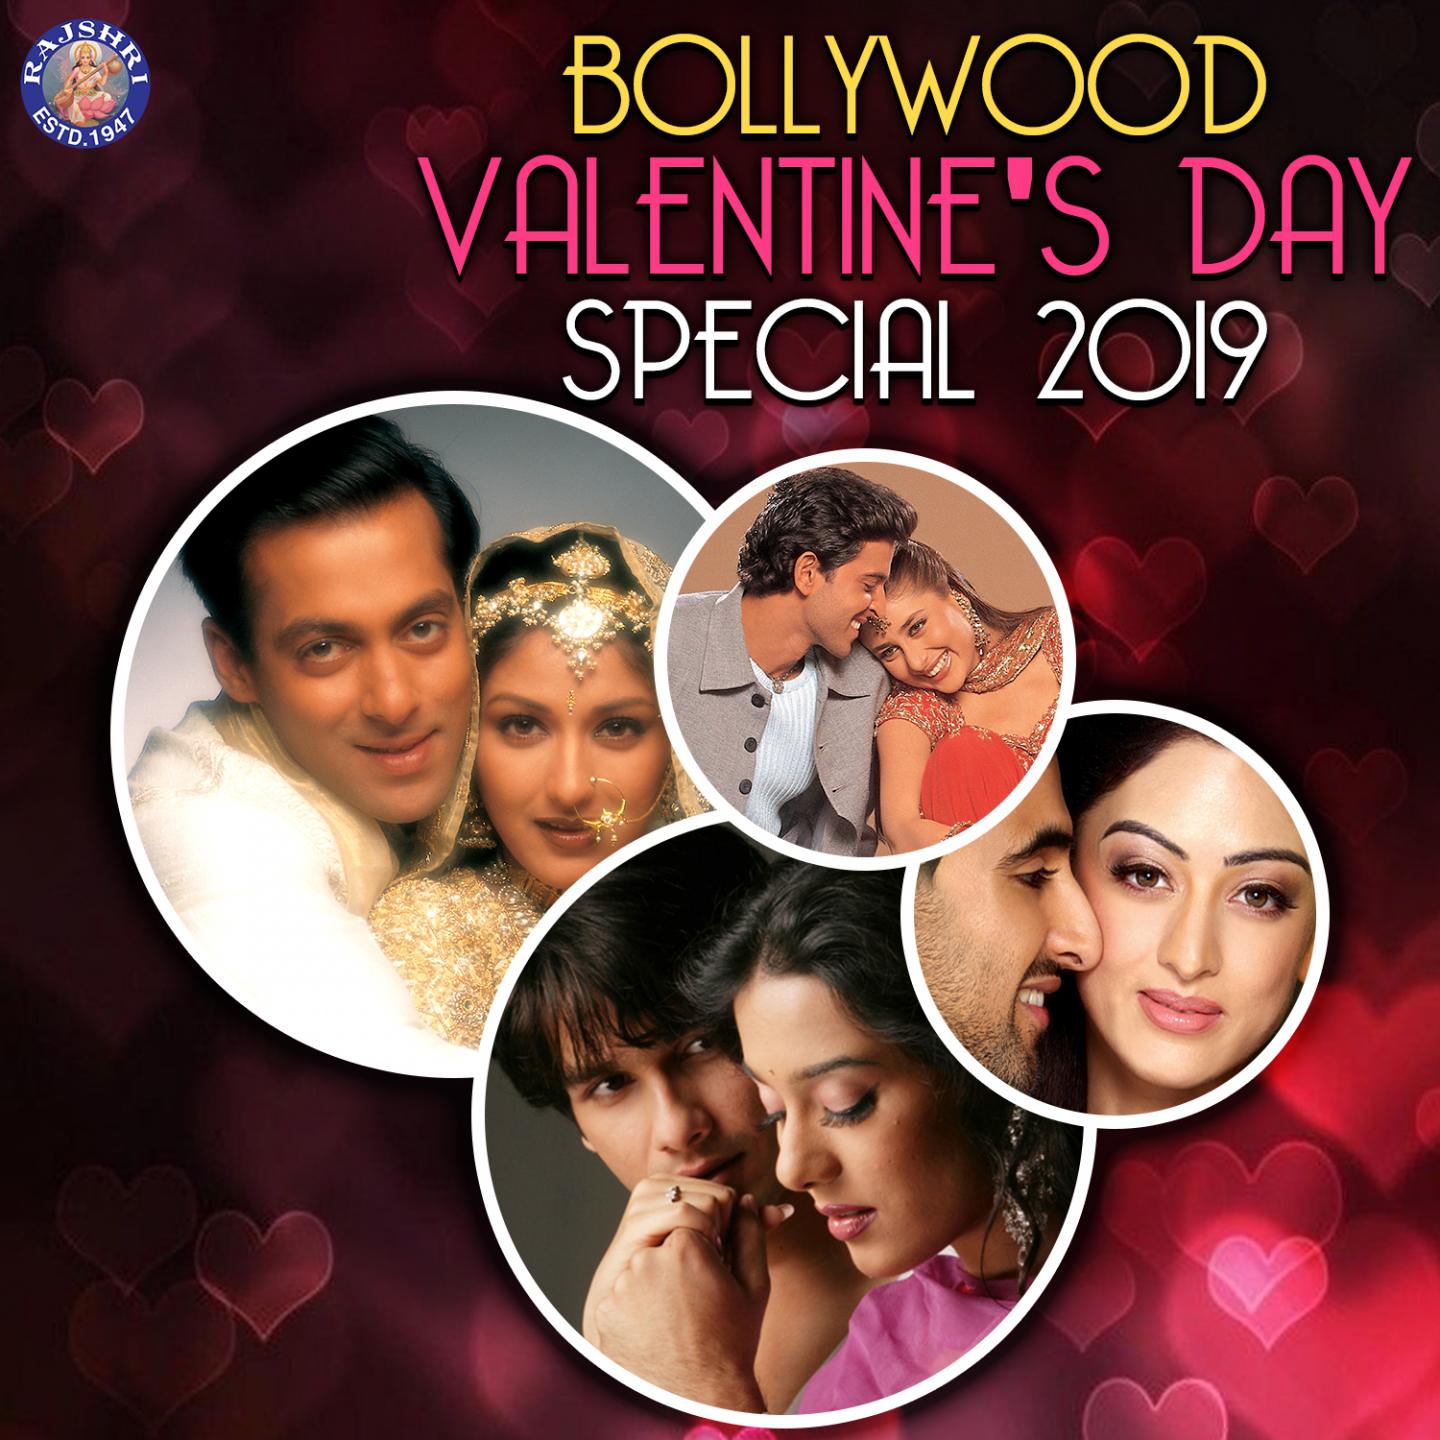 Bollywood Valentine's Day Special 2019